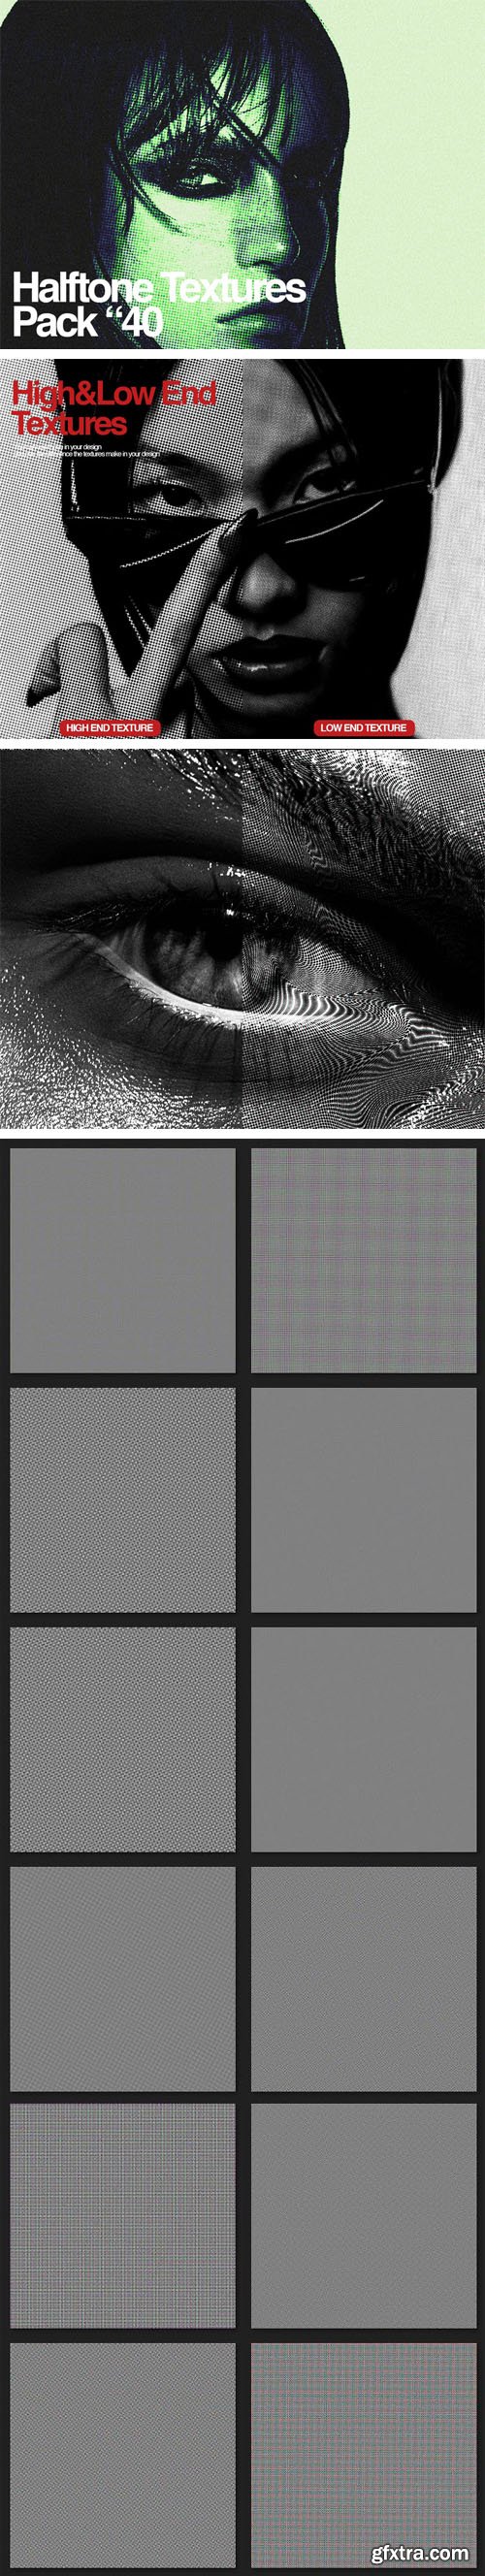 Halftone Textures Pack for Photoshop